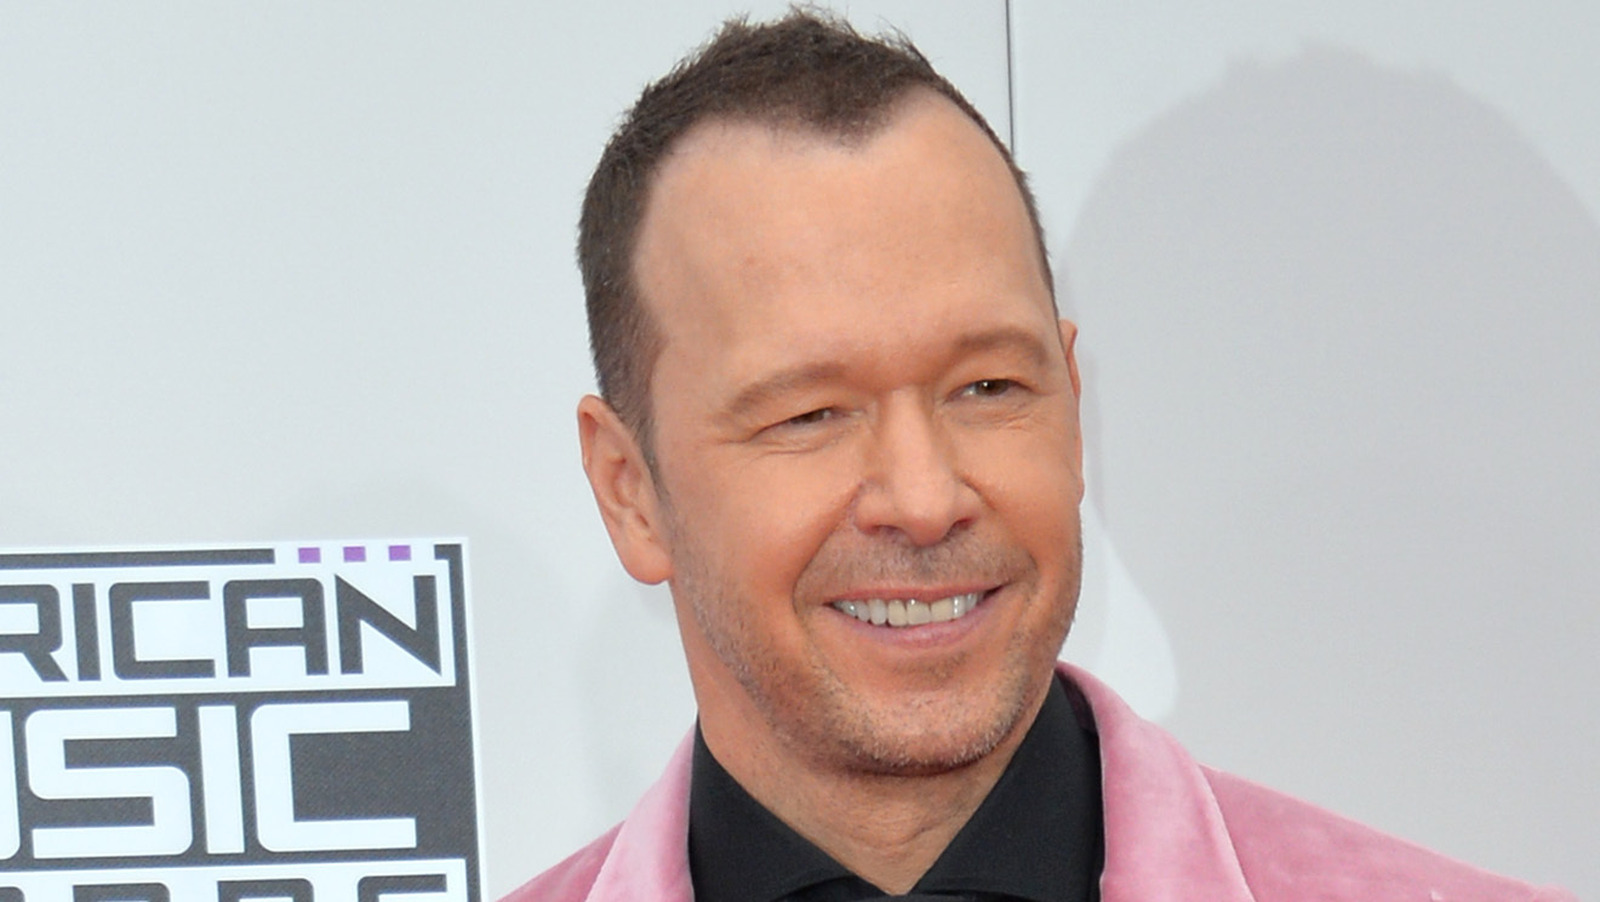 Donnie Wahlberg Biography: Parents, Age, Net Worth, Photos, Wiki, Songs, Movies, Siblings, Children